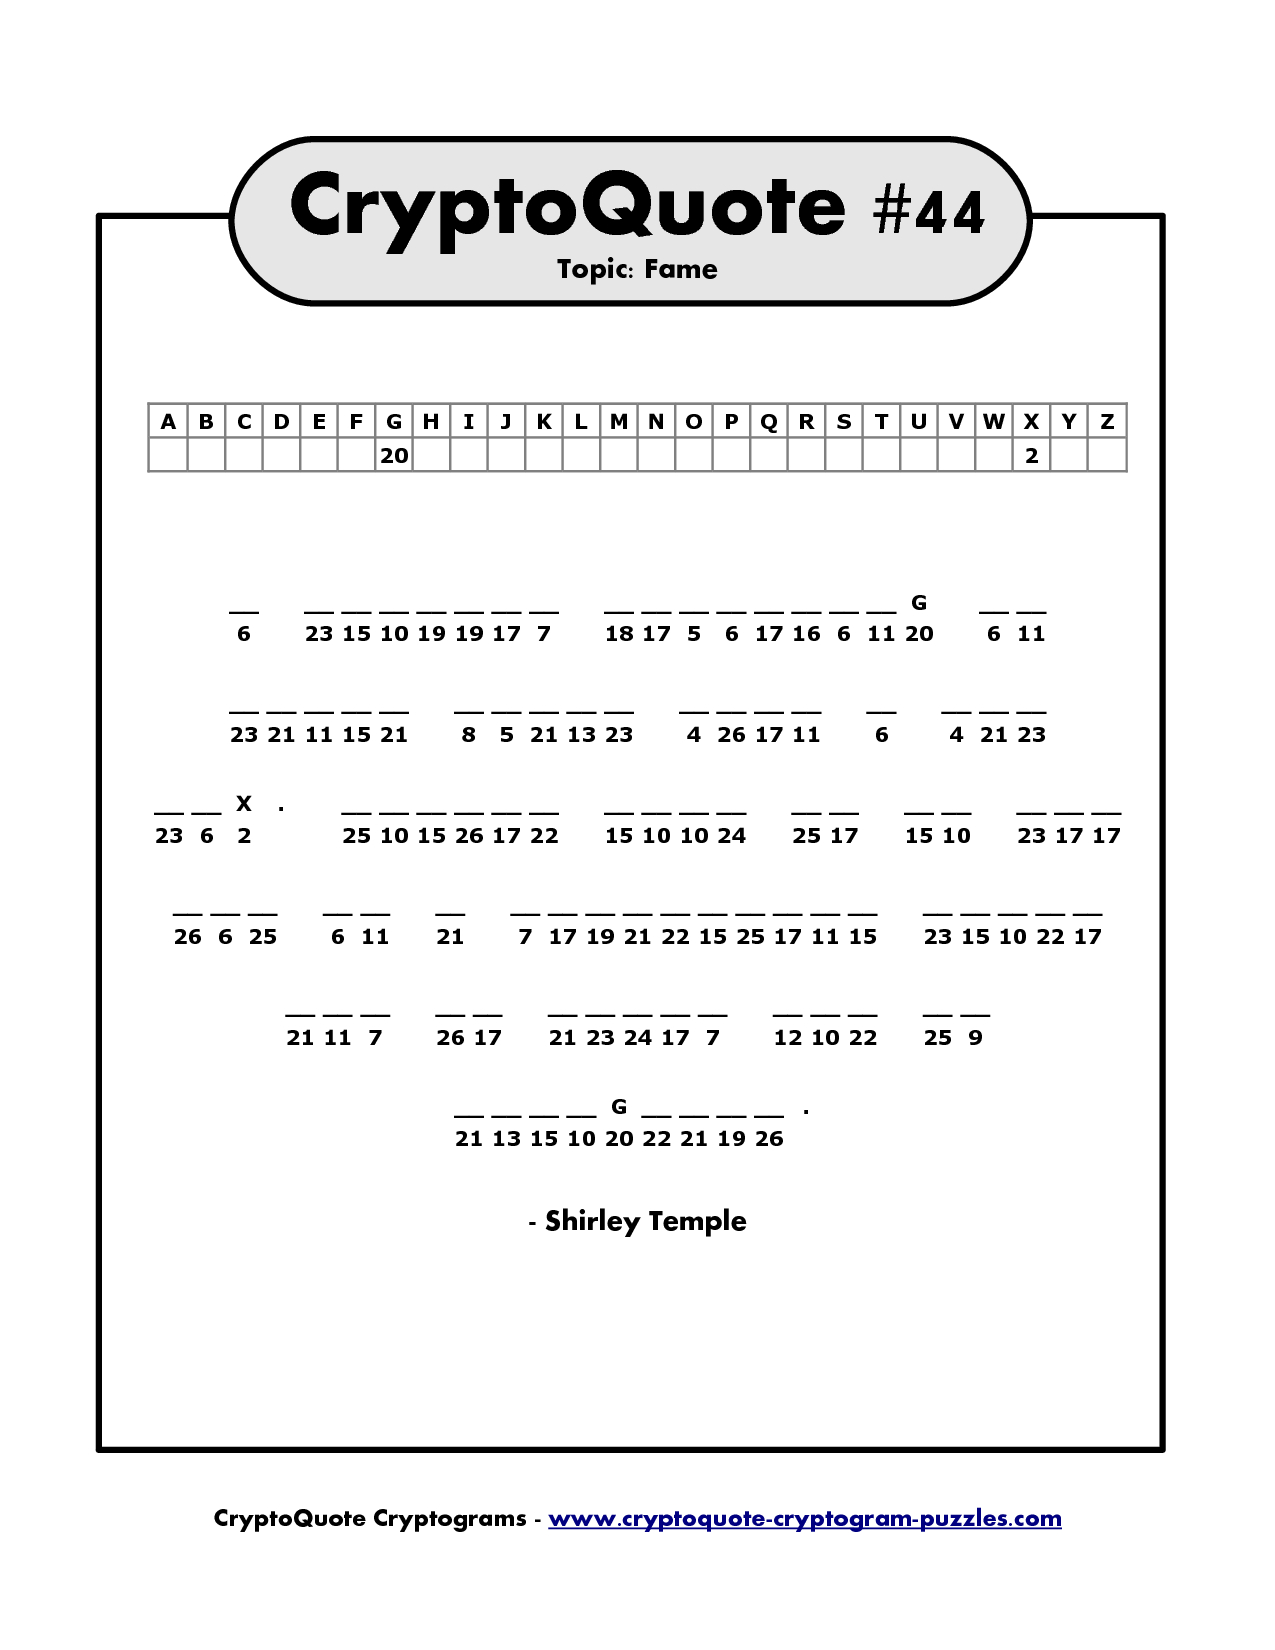 Cryptogram Puzzles To Print | Shirley Temple Cryptoquote - Printable - Printable Cryptogram Puzzles With Answers